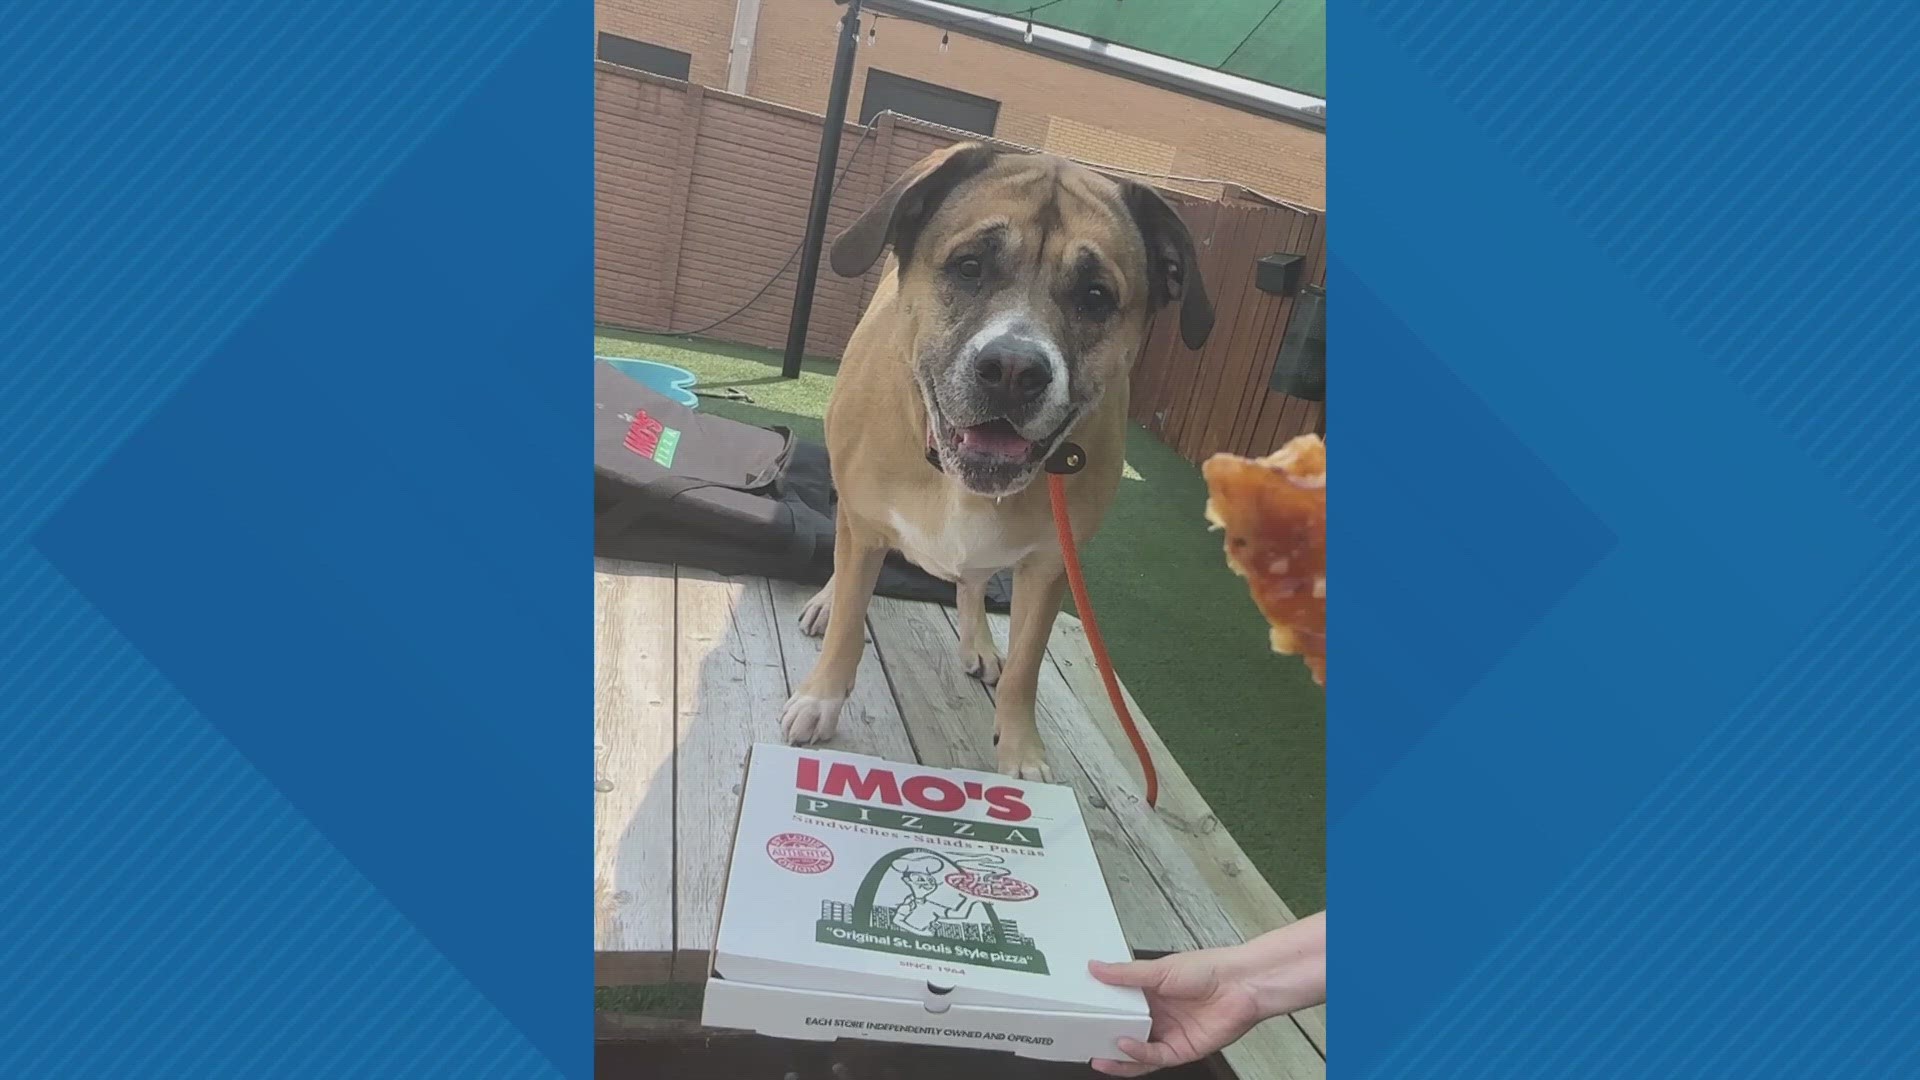 Stray Rescue and Imo's Pizza are hosting a pop-up adoption event Saturday. If you adopt a pet that is older than six months, Imo's will cover the adoption fees.